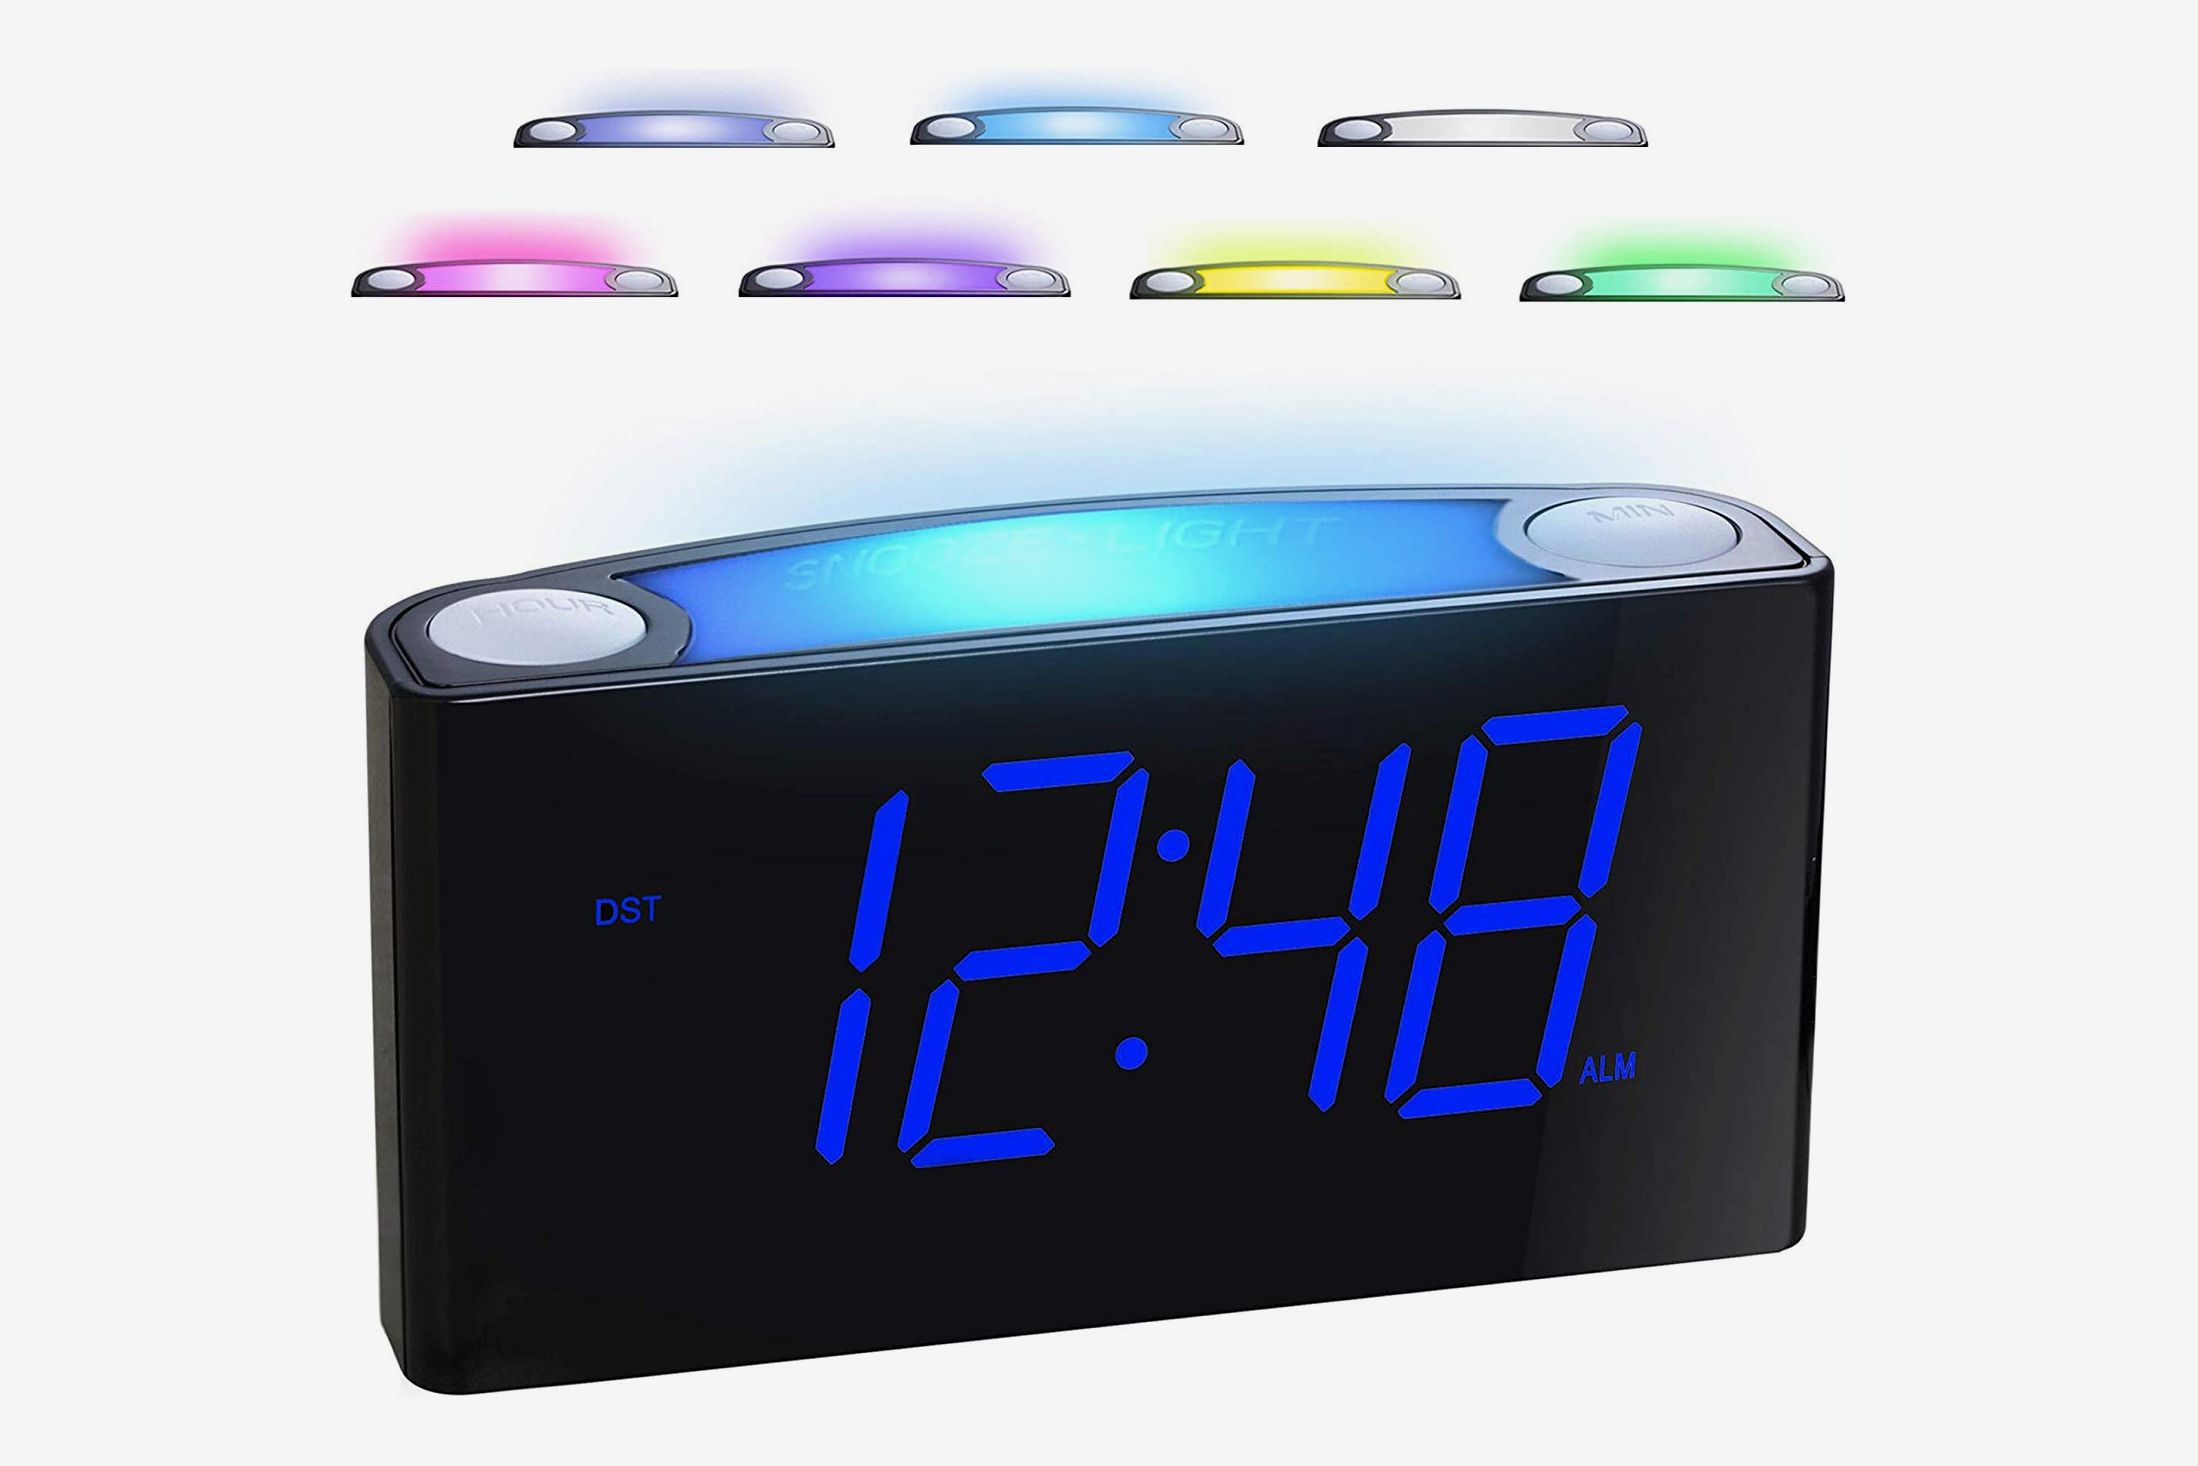 ANOLE Digital Alarm Clock Bedside Alarm Clock Small Travel Alarm Clock with Flip Night Light,Dual Alarm,Snooze Function,Loud Buzzer,12/24 Hours and Dimmer for Bedrooms,Living Room,Office,Travel White